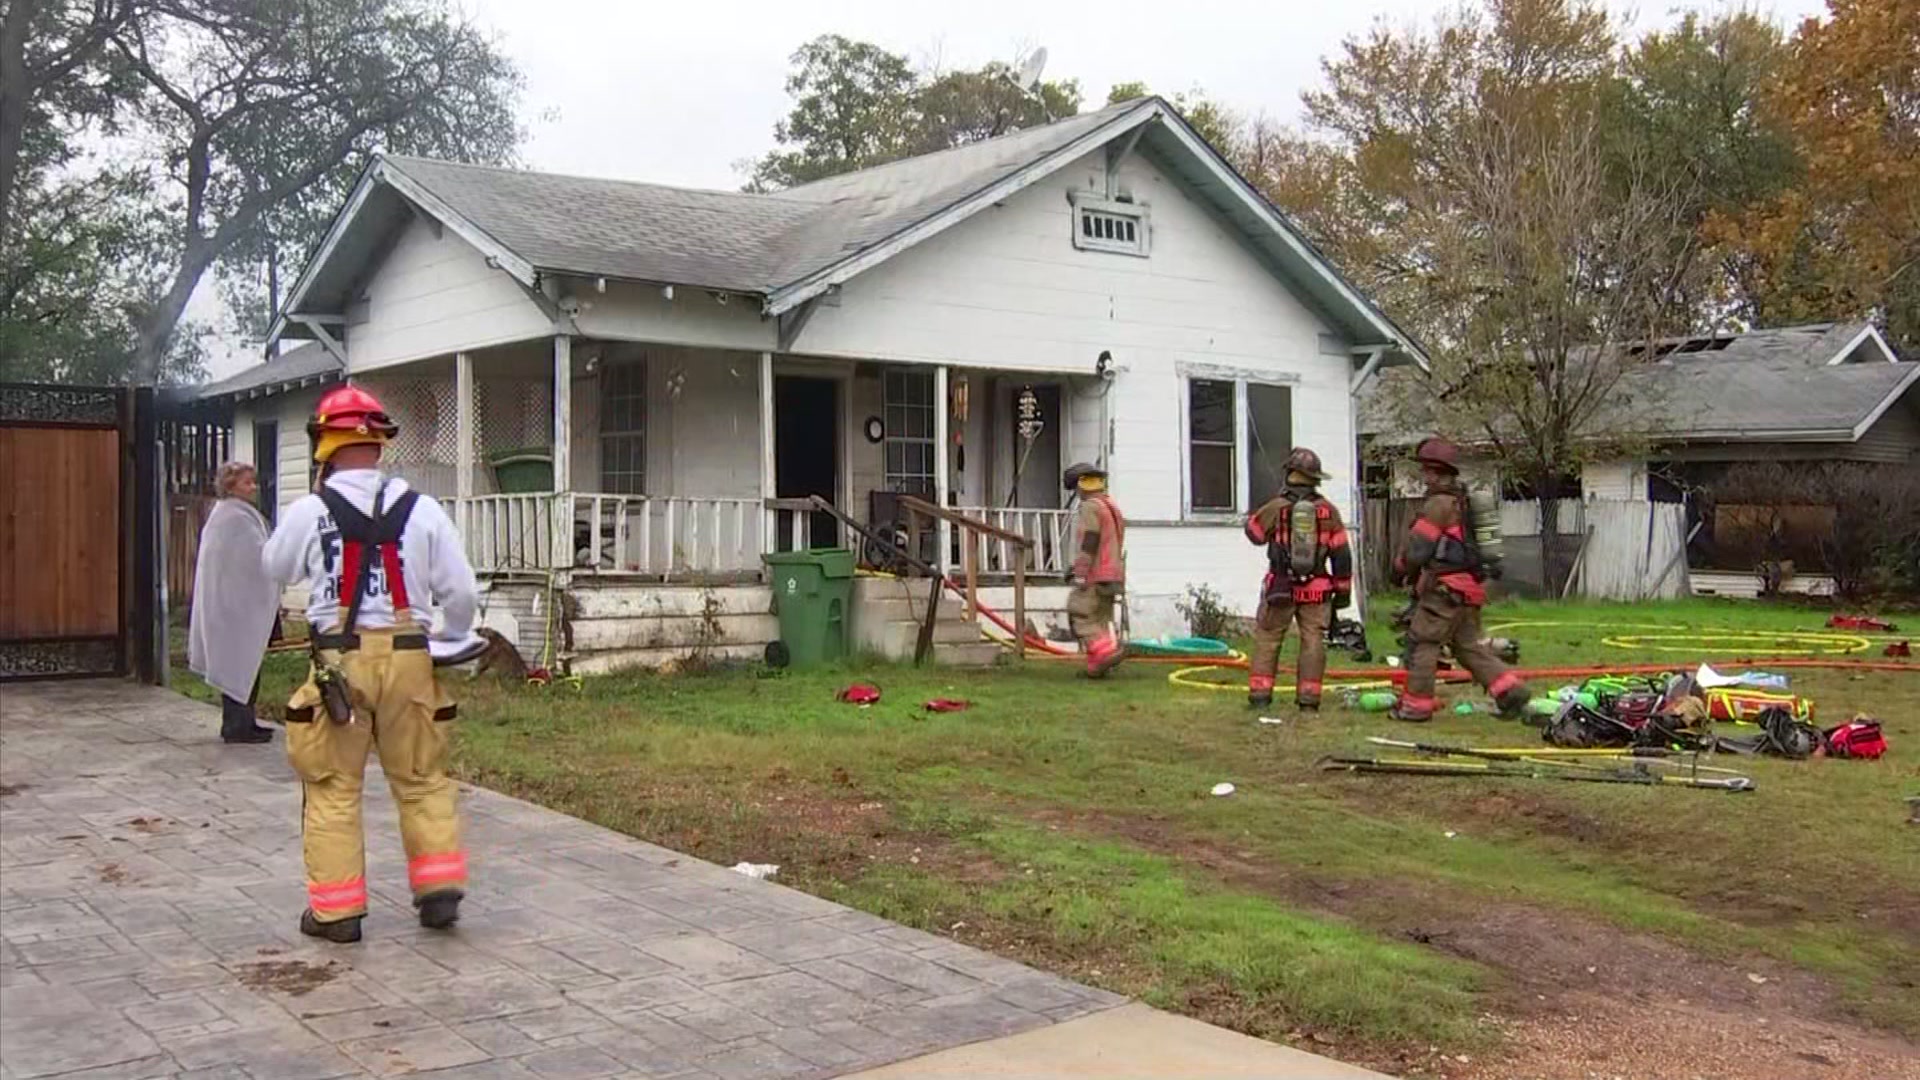 Couple Returns Home From Morning Coffee Run to Find House on Fire